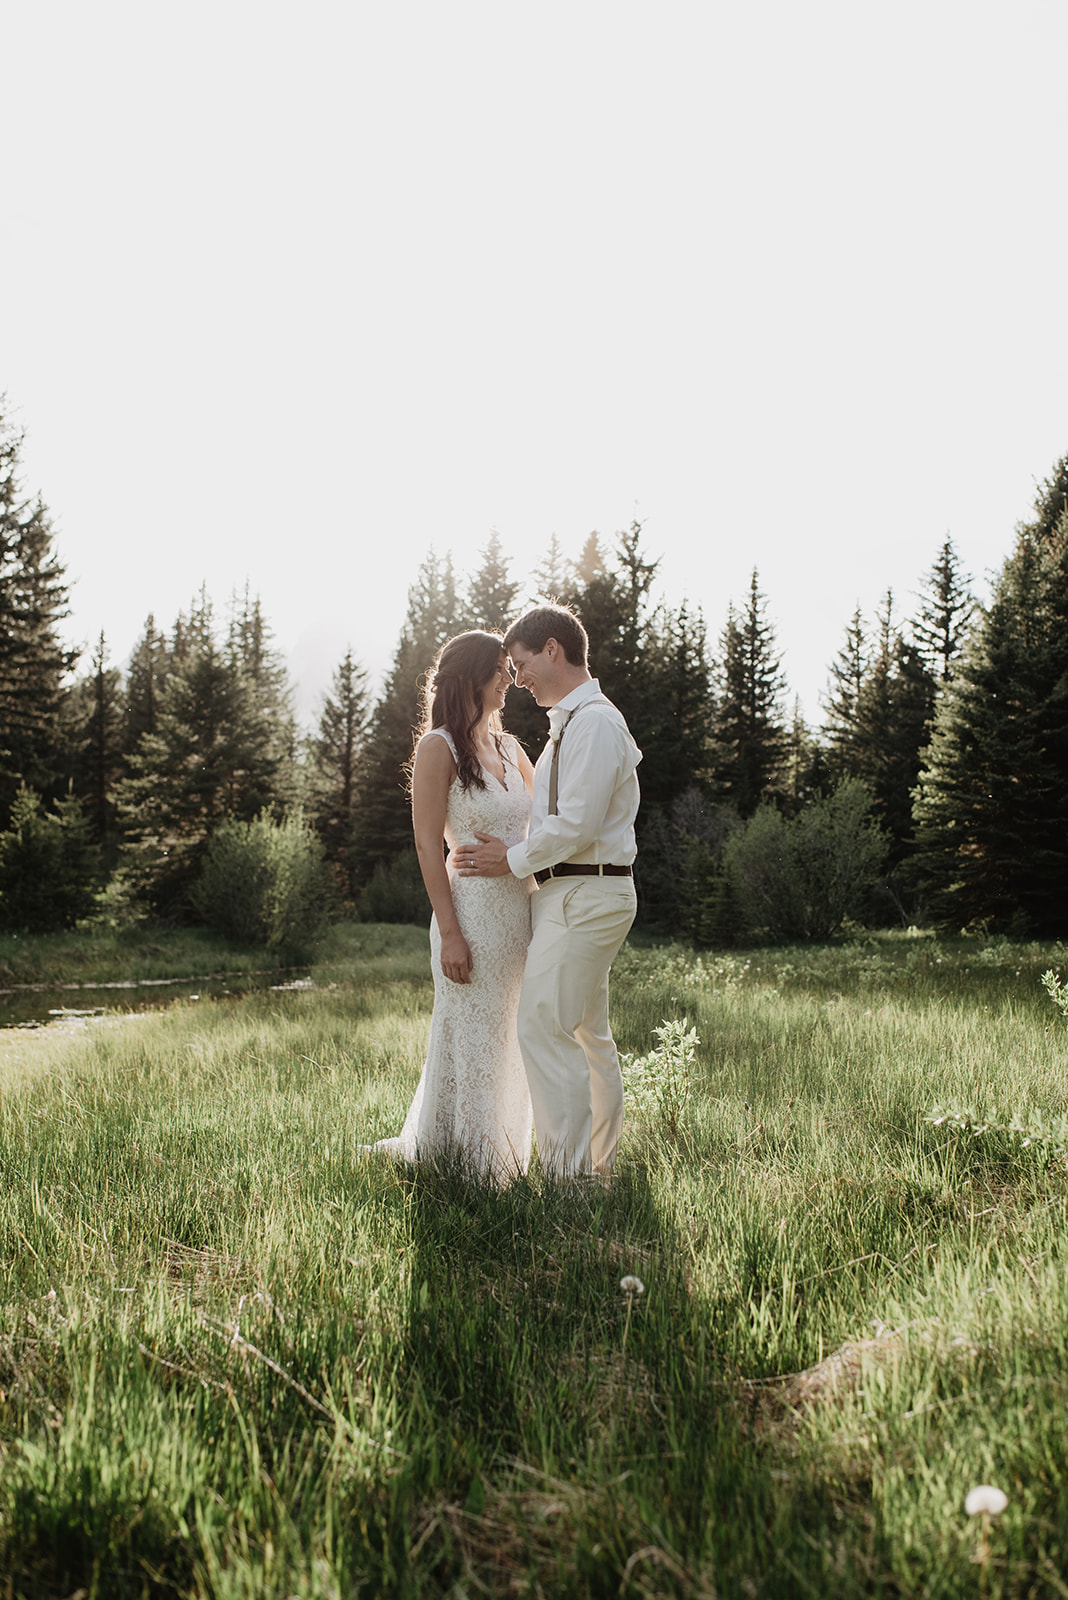 outdoor wedding photos of bride and groom holding each other in a meadow in the Grand Tetons as they rest their foreheads together romantically and the bride wears a lace wedding gown